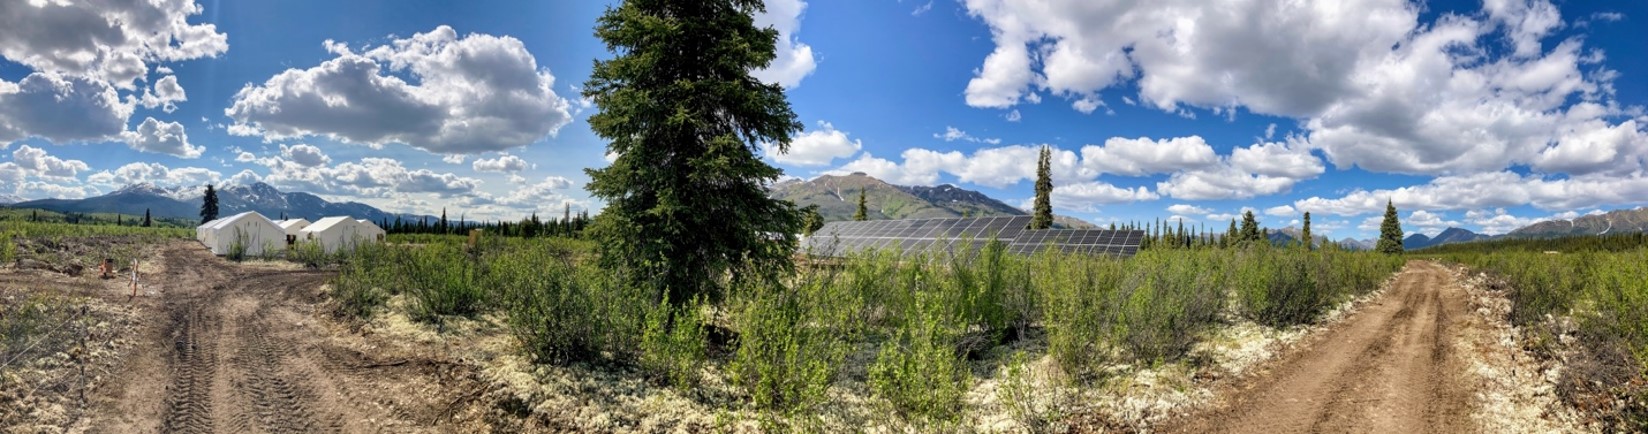 Snowline Gold Corp., Monday, August 1, 2022, Press release picture